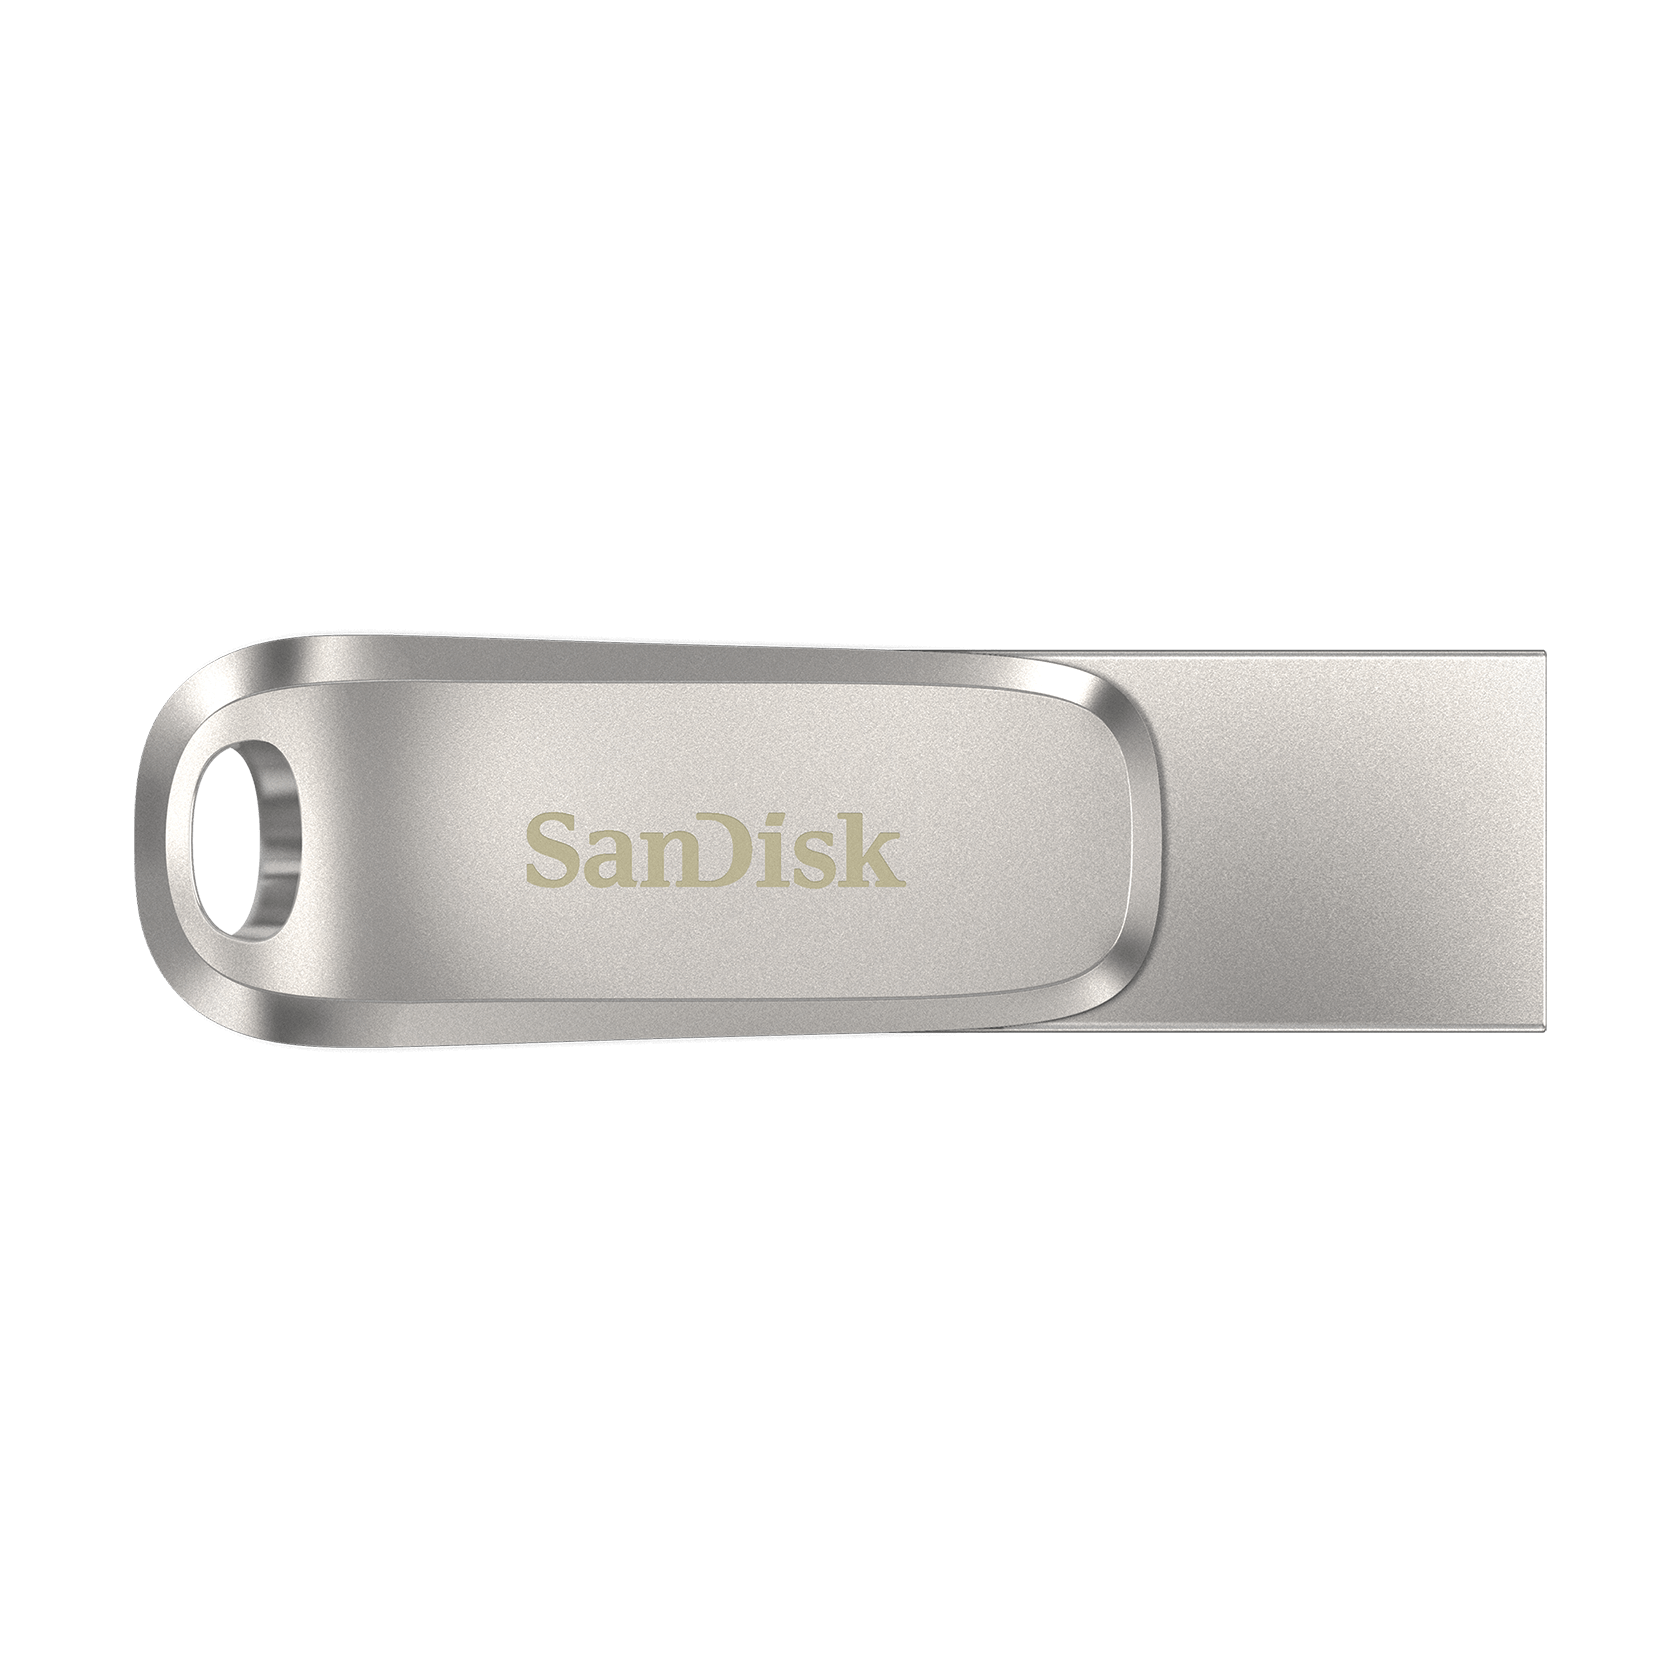 SanDisk 256GB Ultra Dual Drive Luxe USB Type-C Flash Drive - SDDDC4-256G-G46 - image 4 of 8